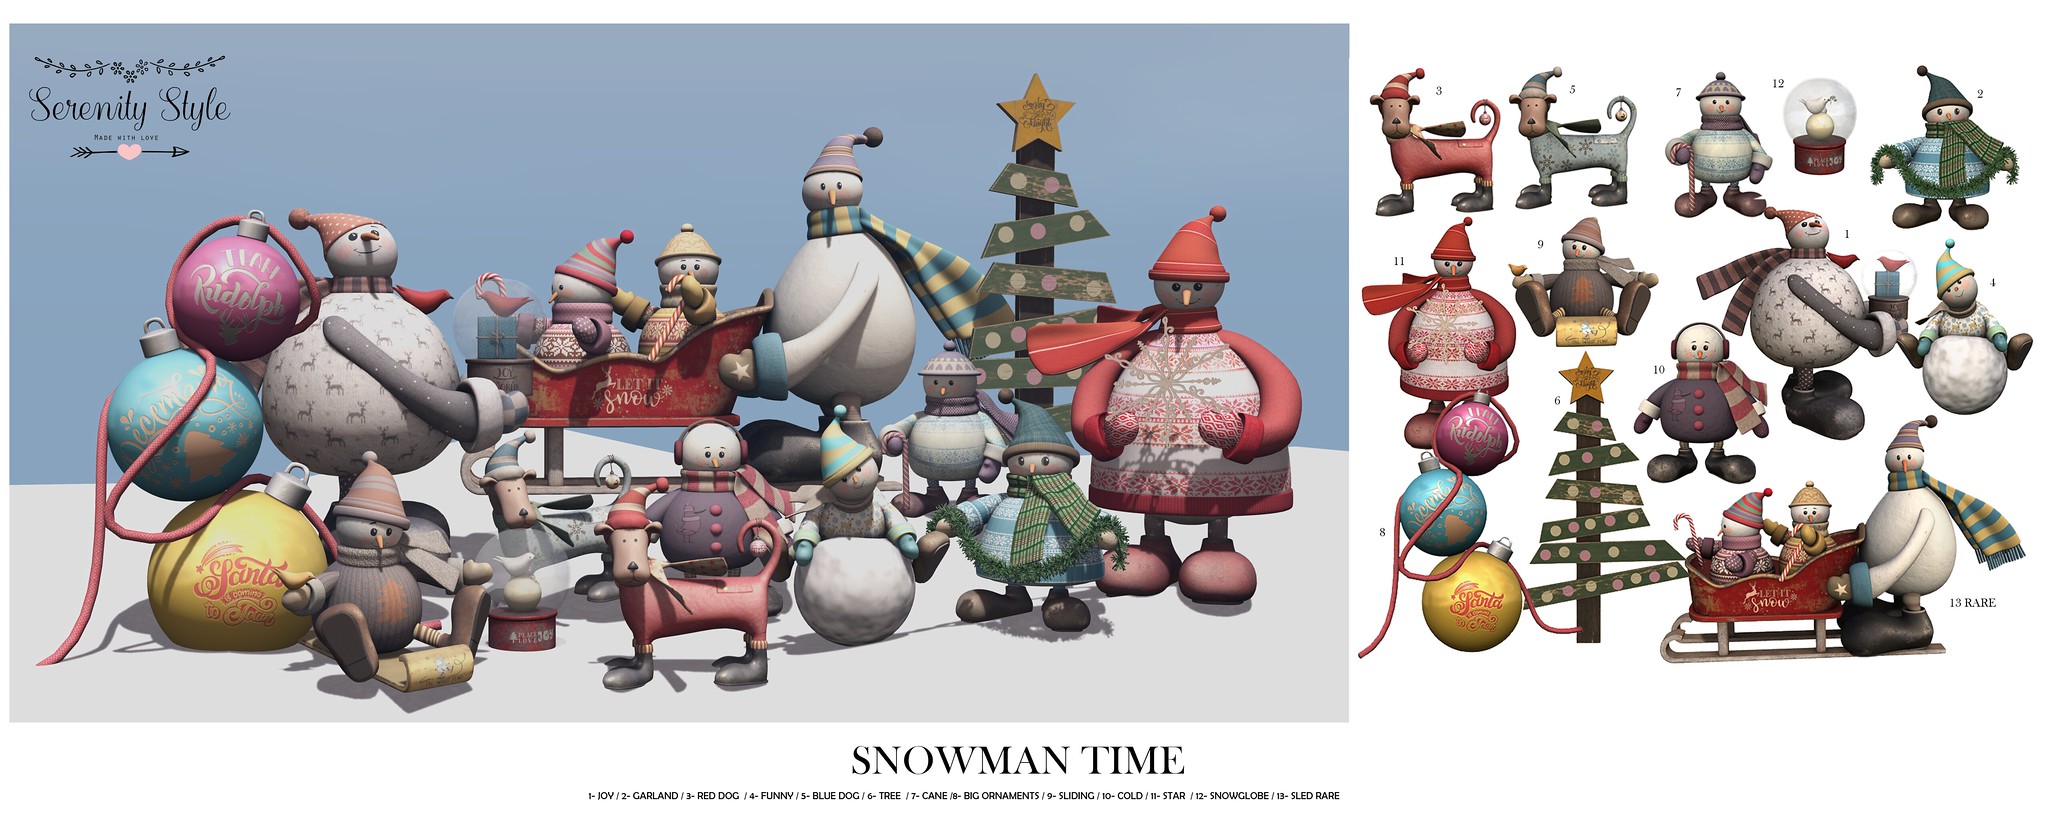 Serenity Style – Snowman Time